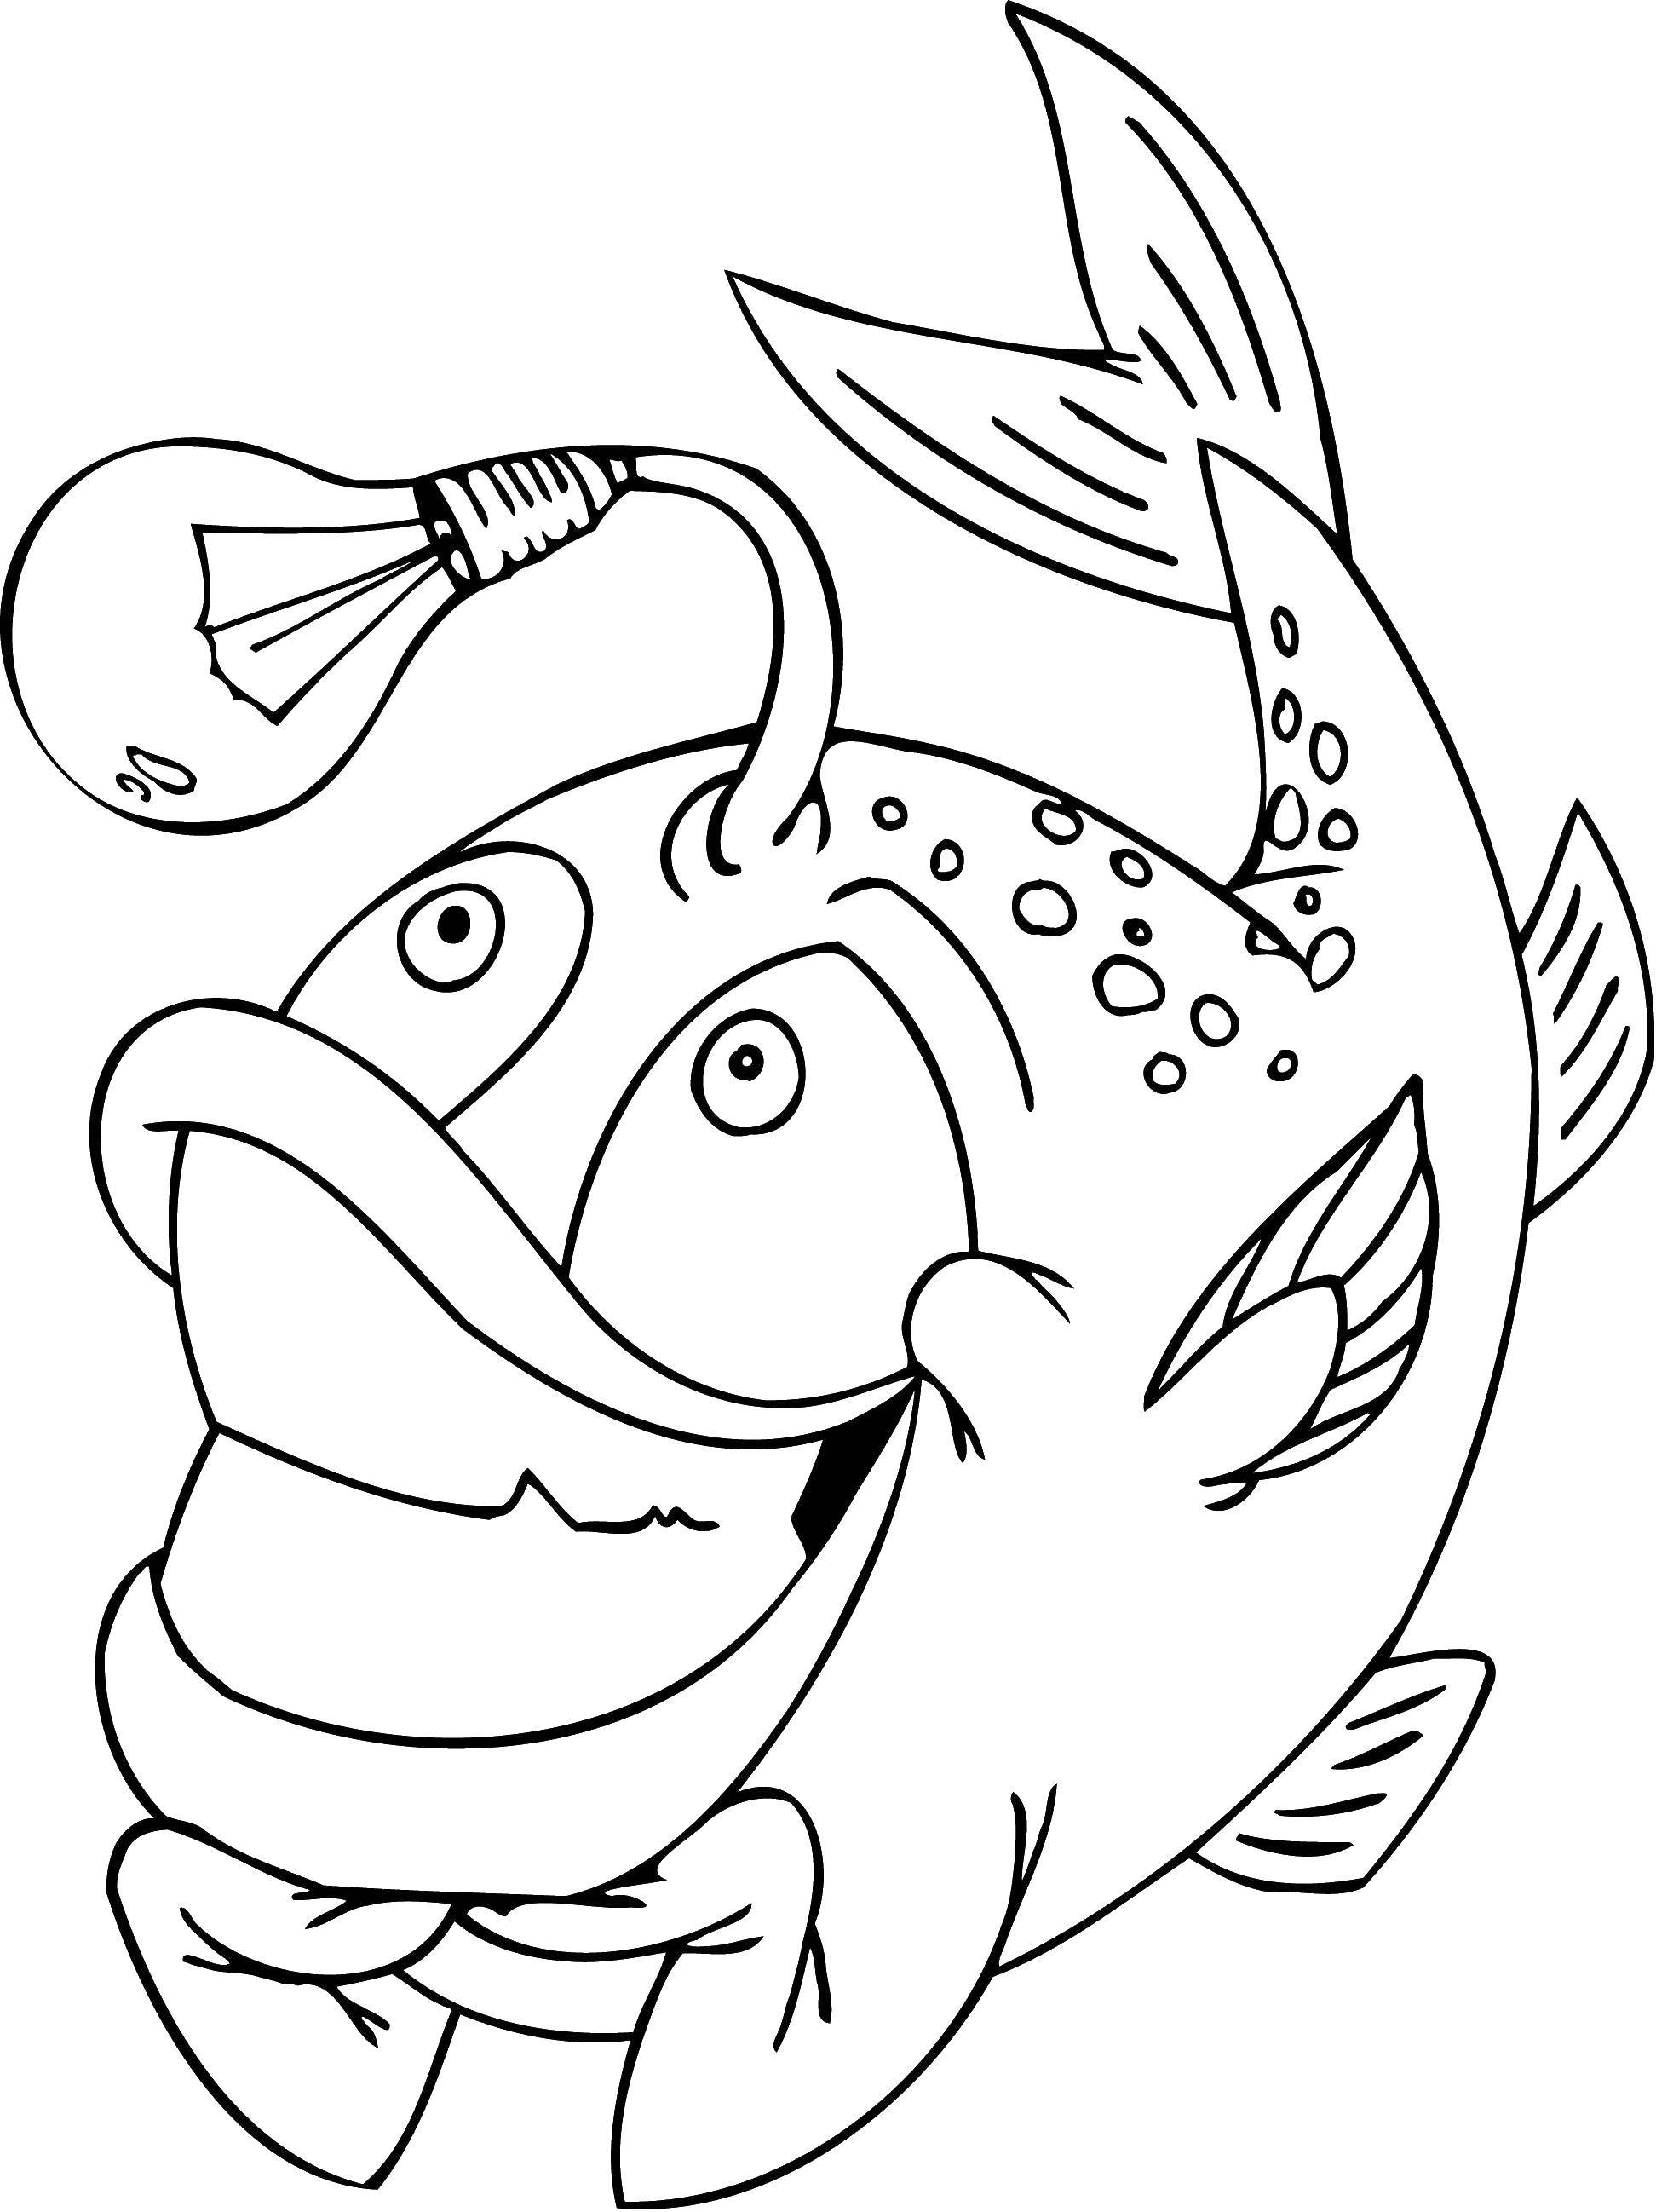 Coloring Light anglerfish. Category coloring. Tags:  Underwater world, fish.